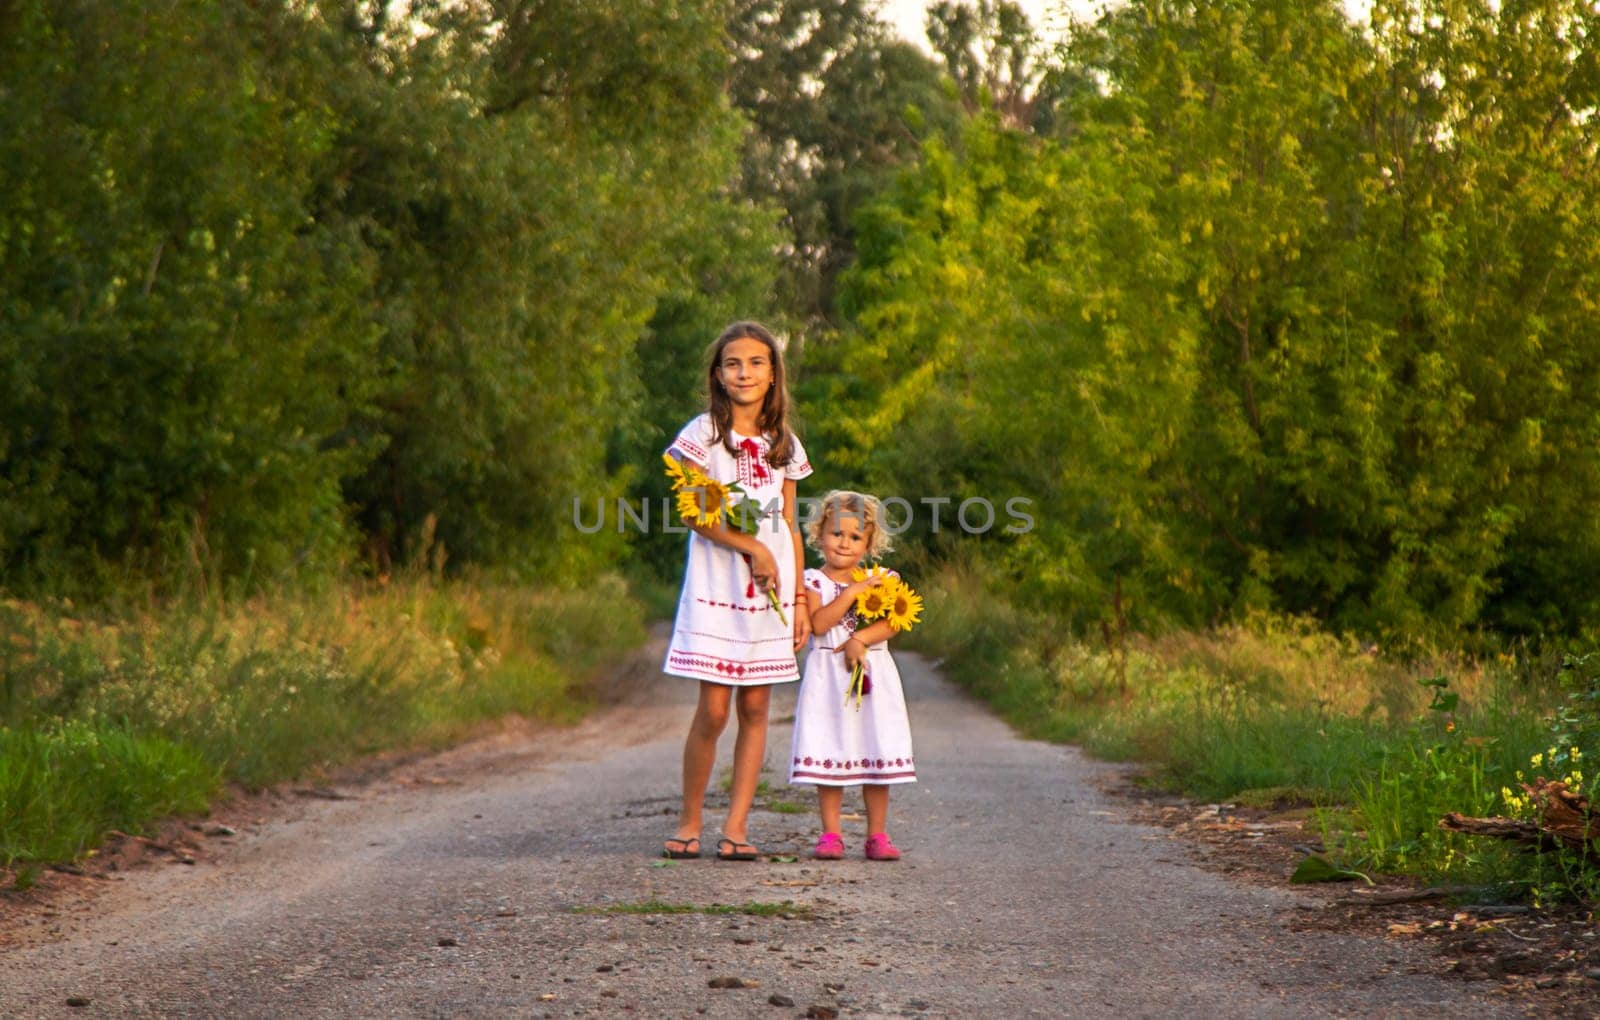 A child in a field of sunflowers Ukraine. Selective focus. Nature.